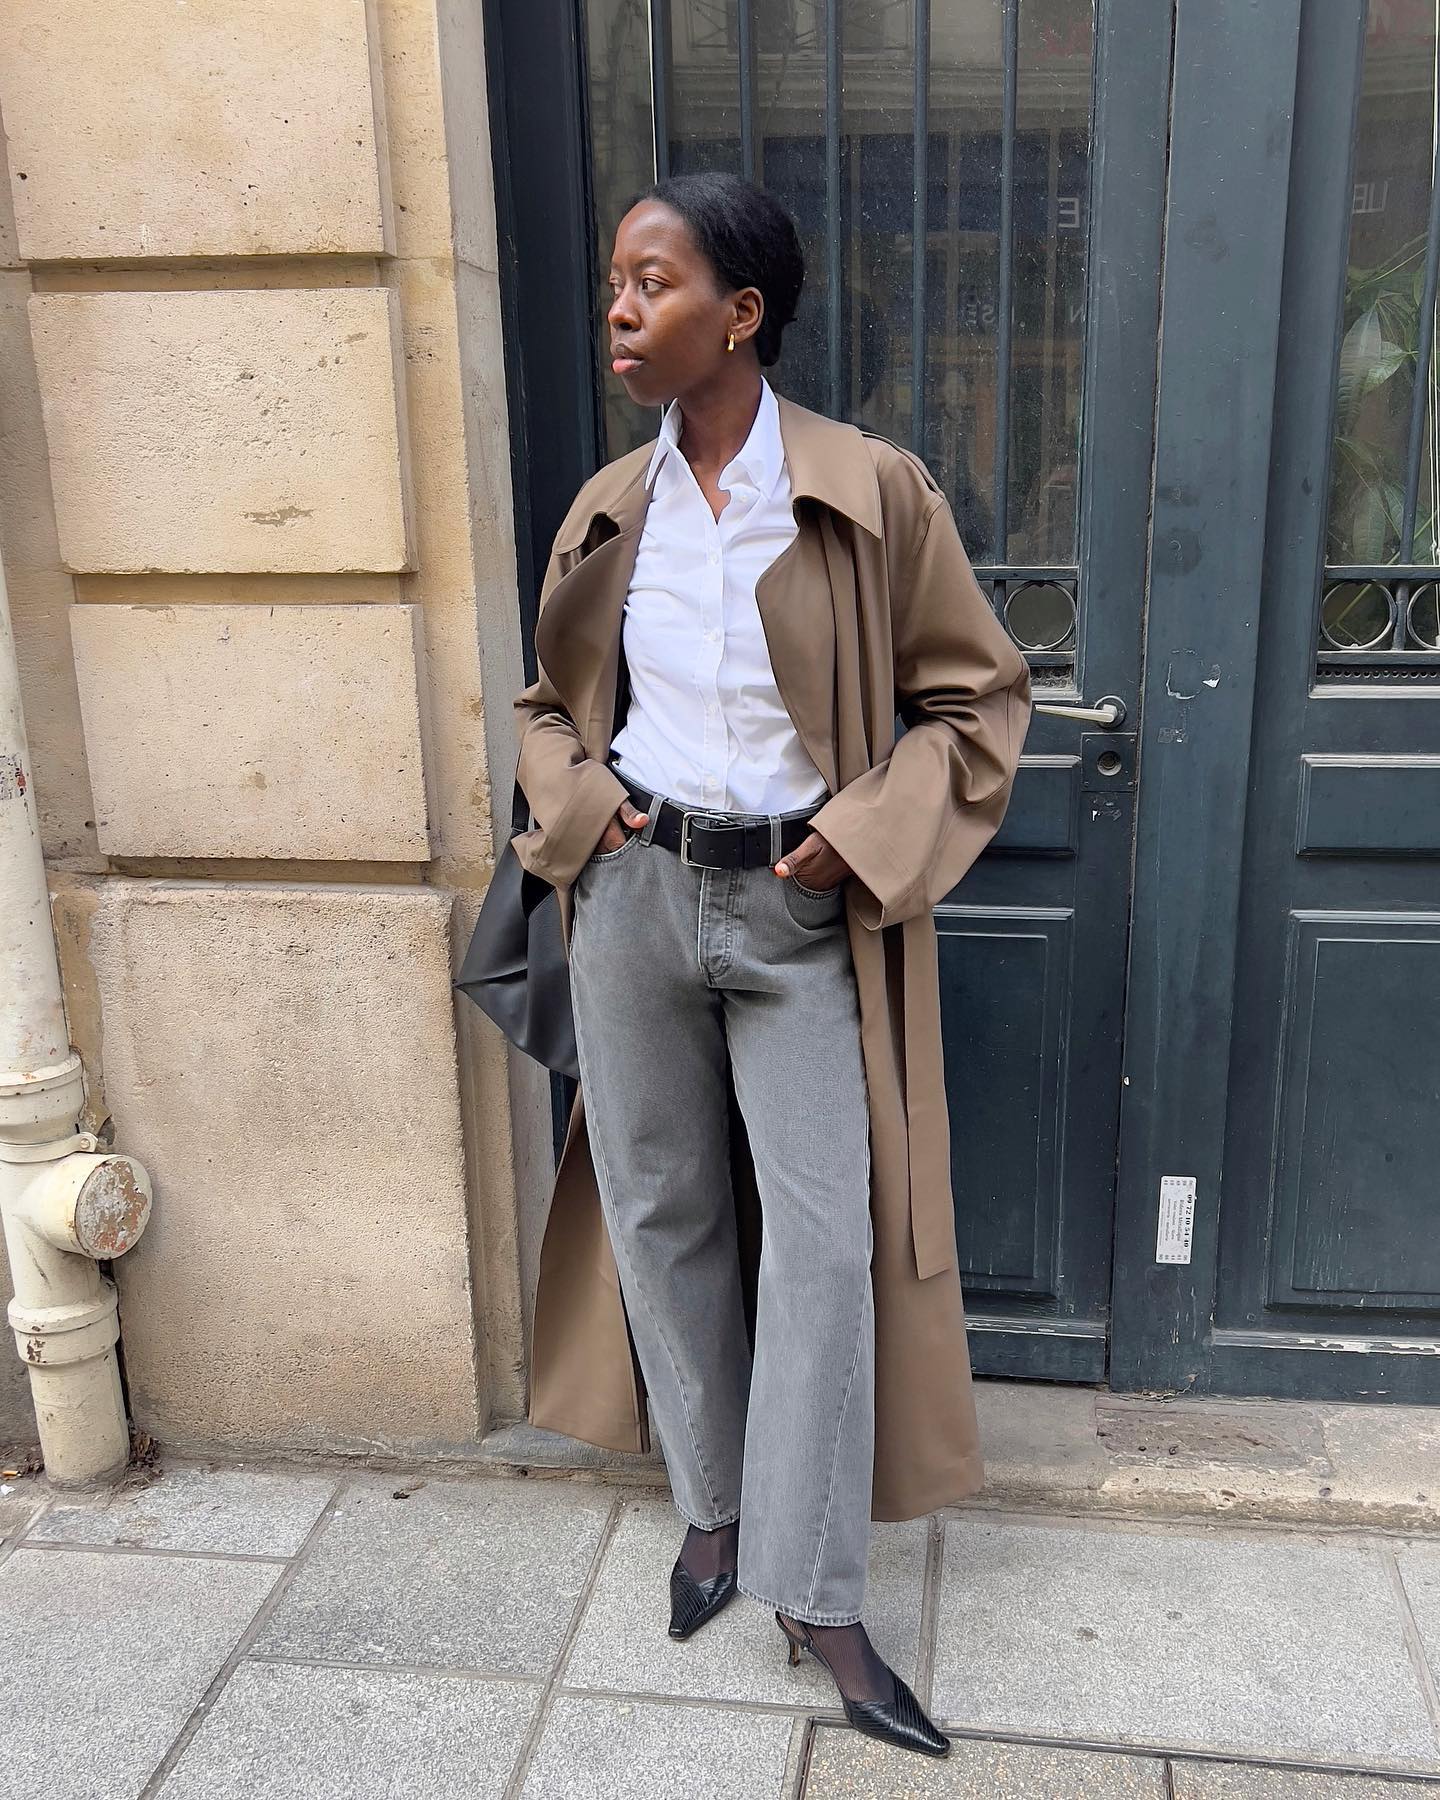 fashion influencer Sylvie Mus standing on the streets of Paris in a trench coat, button-down shirt, gray jeans, and black slingback heels